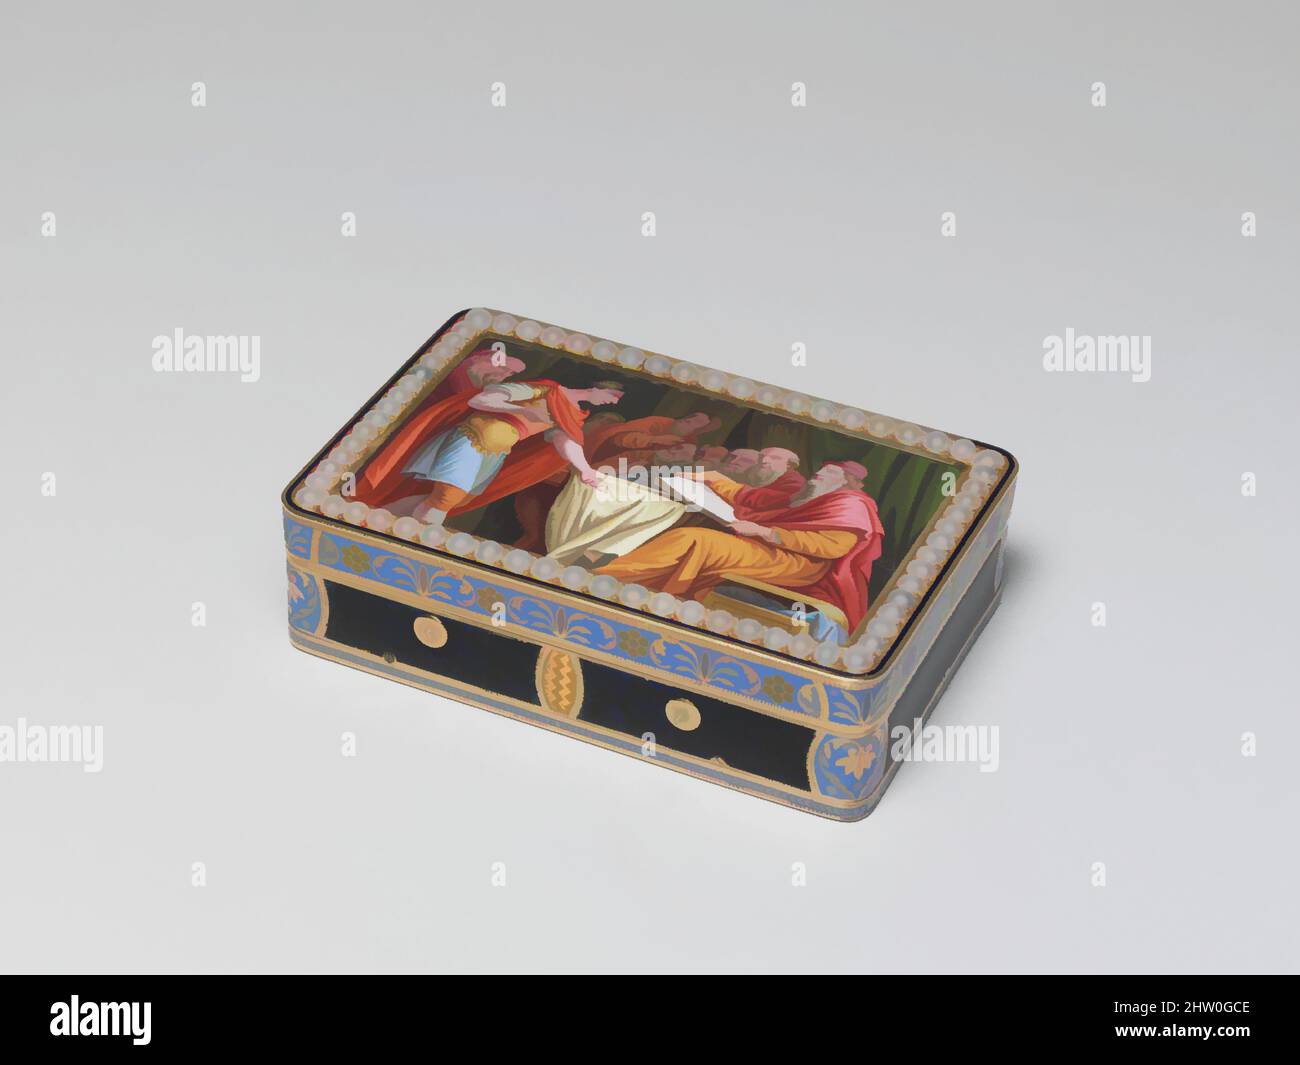 Art inspired by Music Box, ca. 1820, Switzerland, Swiss, Various materials, L. 8.3 cm (3 1/4 in.) x W. 5.7 cm (2 1/4 in.) x D. 2.2 cm (7/8 in.), Idiophone, Oblong gold and enamel music box. The borders enamelled blue and yellow, the cover bearing an enamelled classical miniature, Classic works modernized by Artotop with a splash of modernity. Shapes, color and value, eye-catching visual impact on art. Emotions through freedom of artworks in a contemporary way. A timeless message pursuing a wildly creative new direction. Artists turning to the digital medium and creating the Artotop NFT Stock Photo